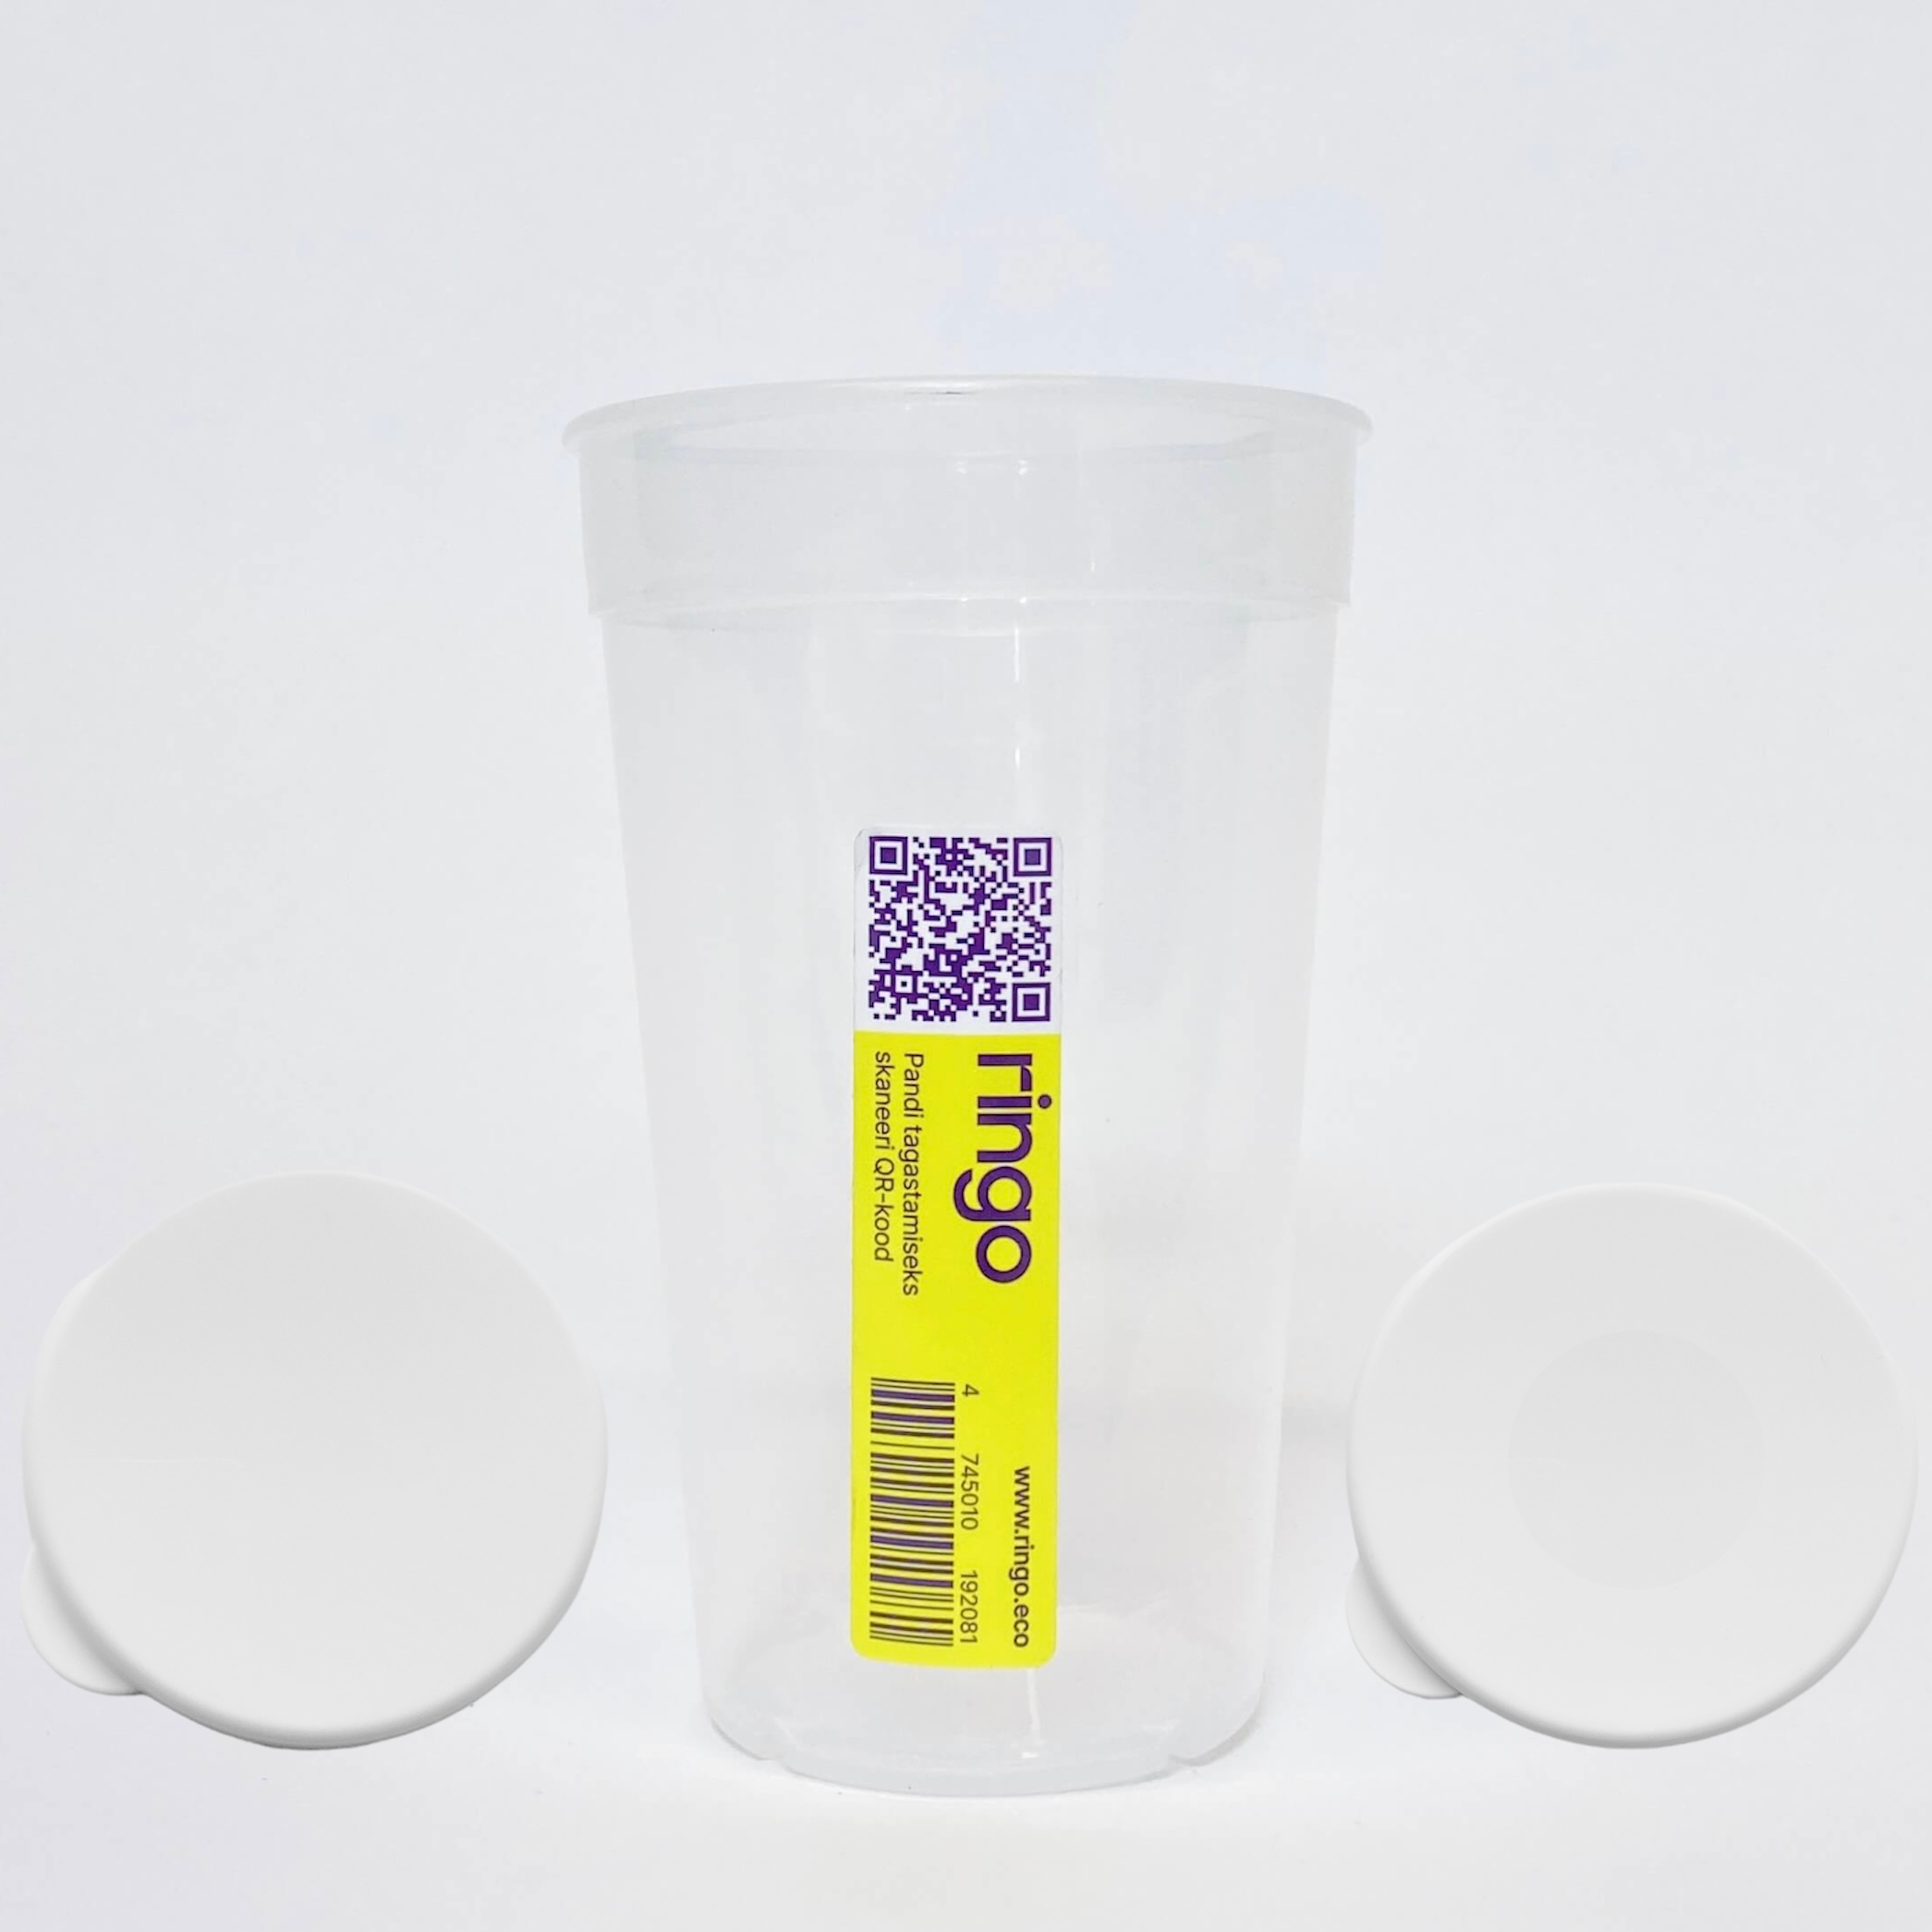 Ringo CUP with Lid 500ml white-transparent round